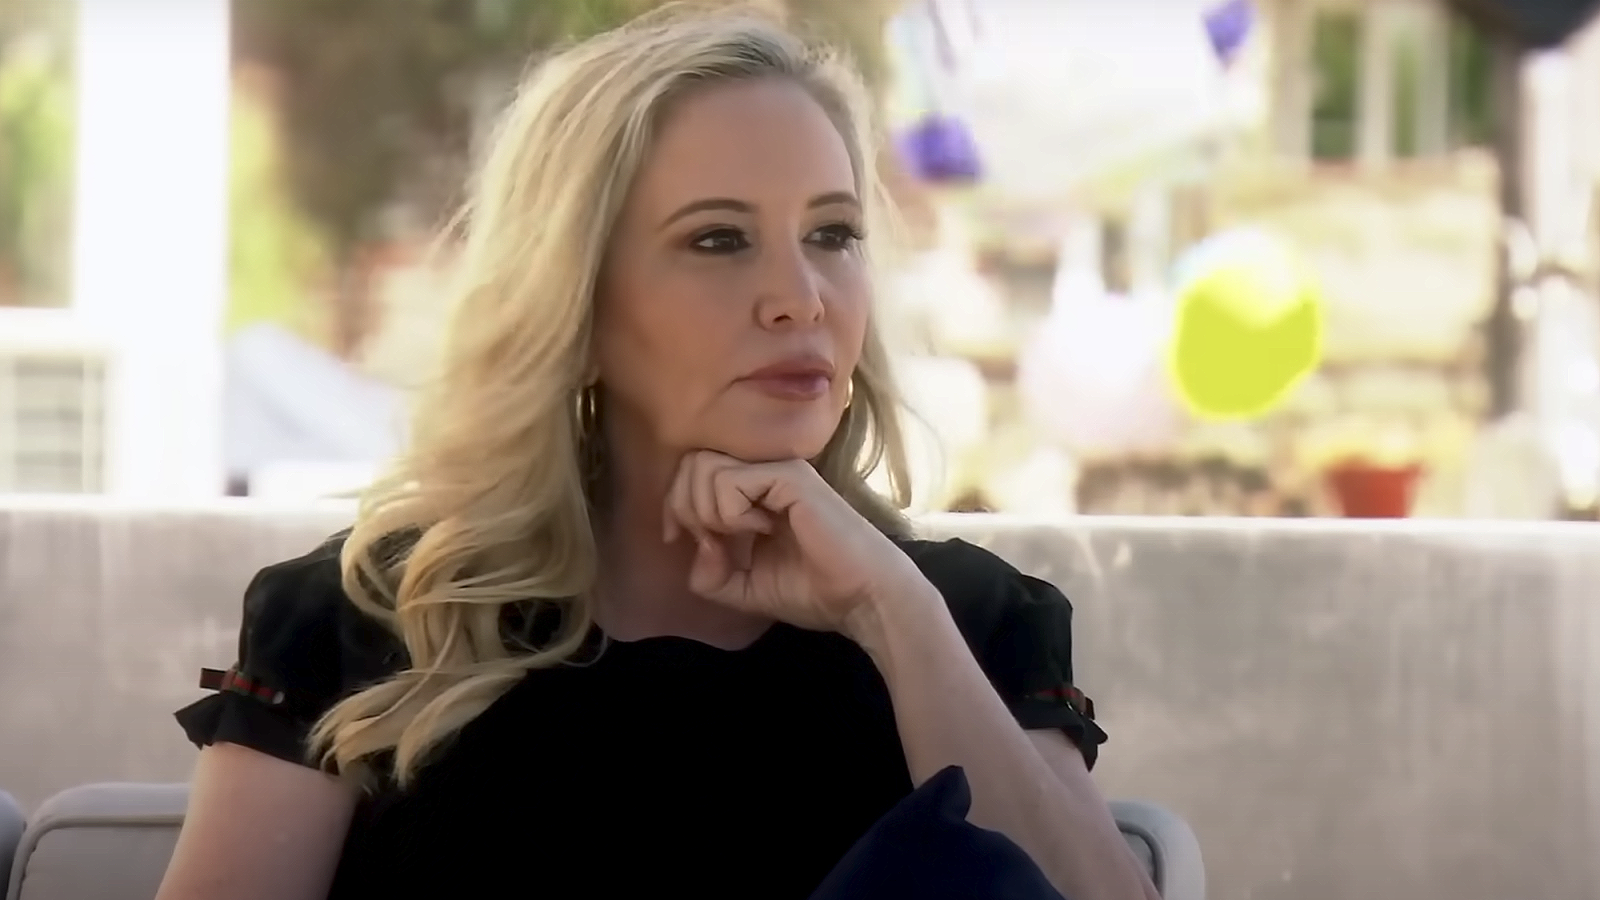 Shannon Beador Breaks Her Silence After DUI and Hit and Run